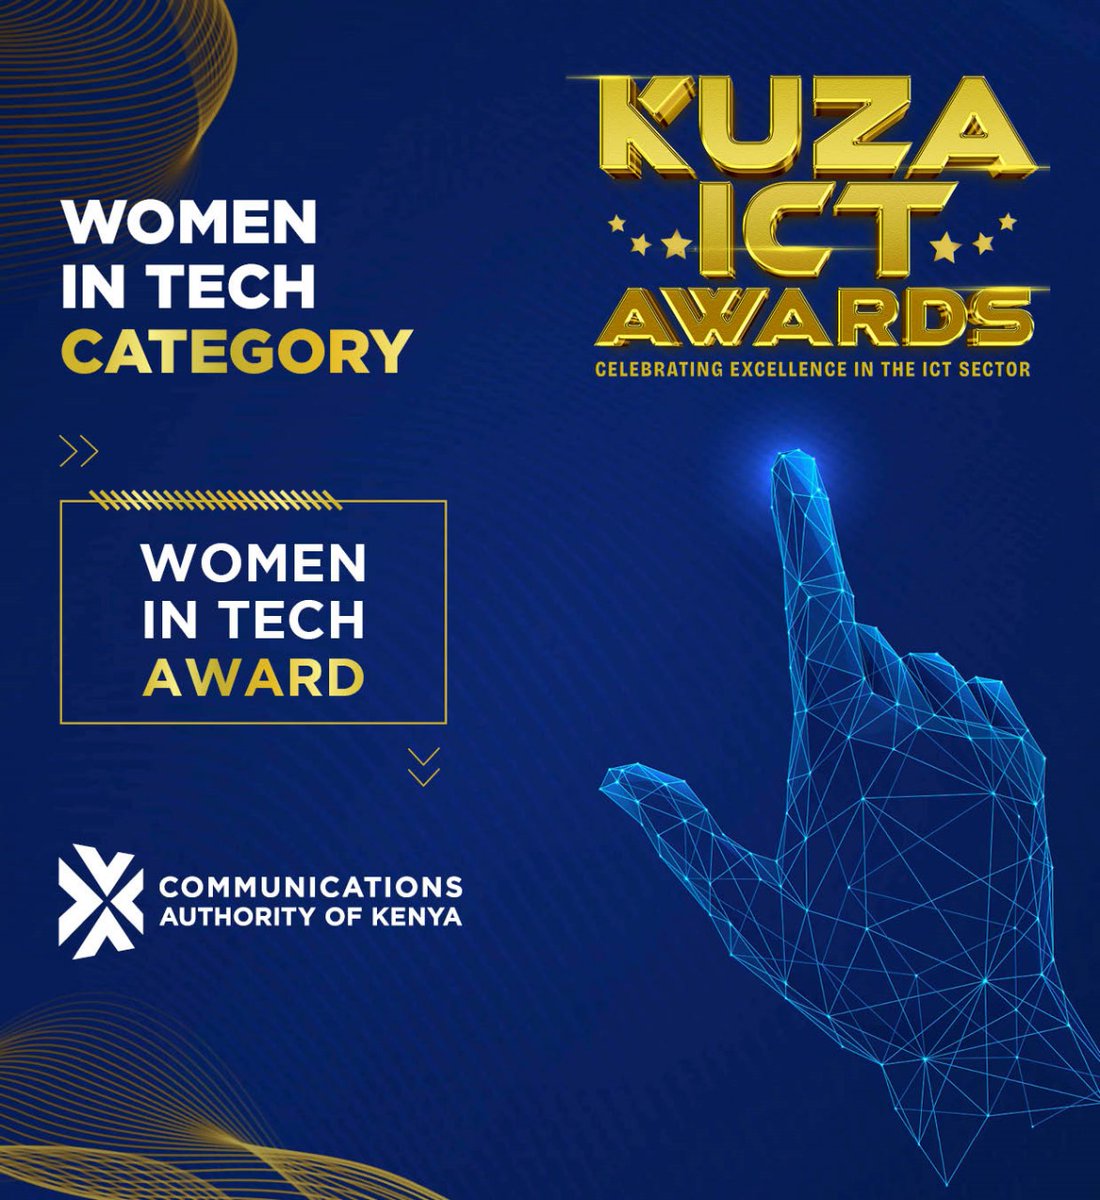 Celebrating Women in Tech! The Women in Tech Award honors trailblazing women who have created impactful ICT solutions and shown successful entrepreneurship and leadership in the sector. This category is based on call for nominations from the industry! #KuzaICTAwards2024